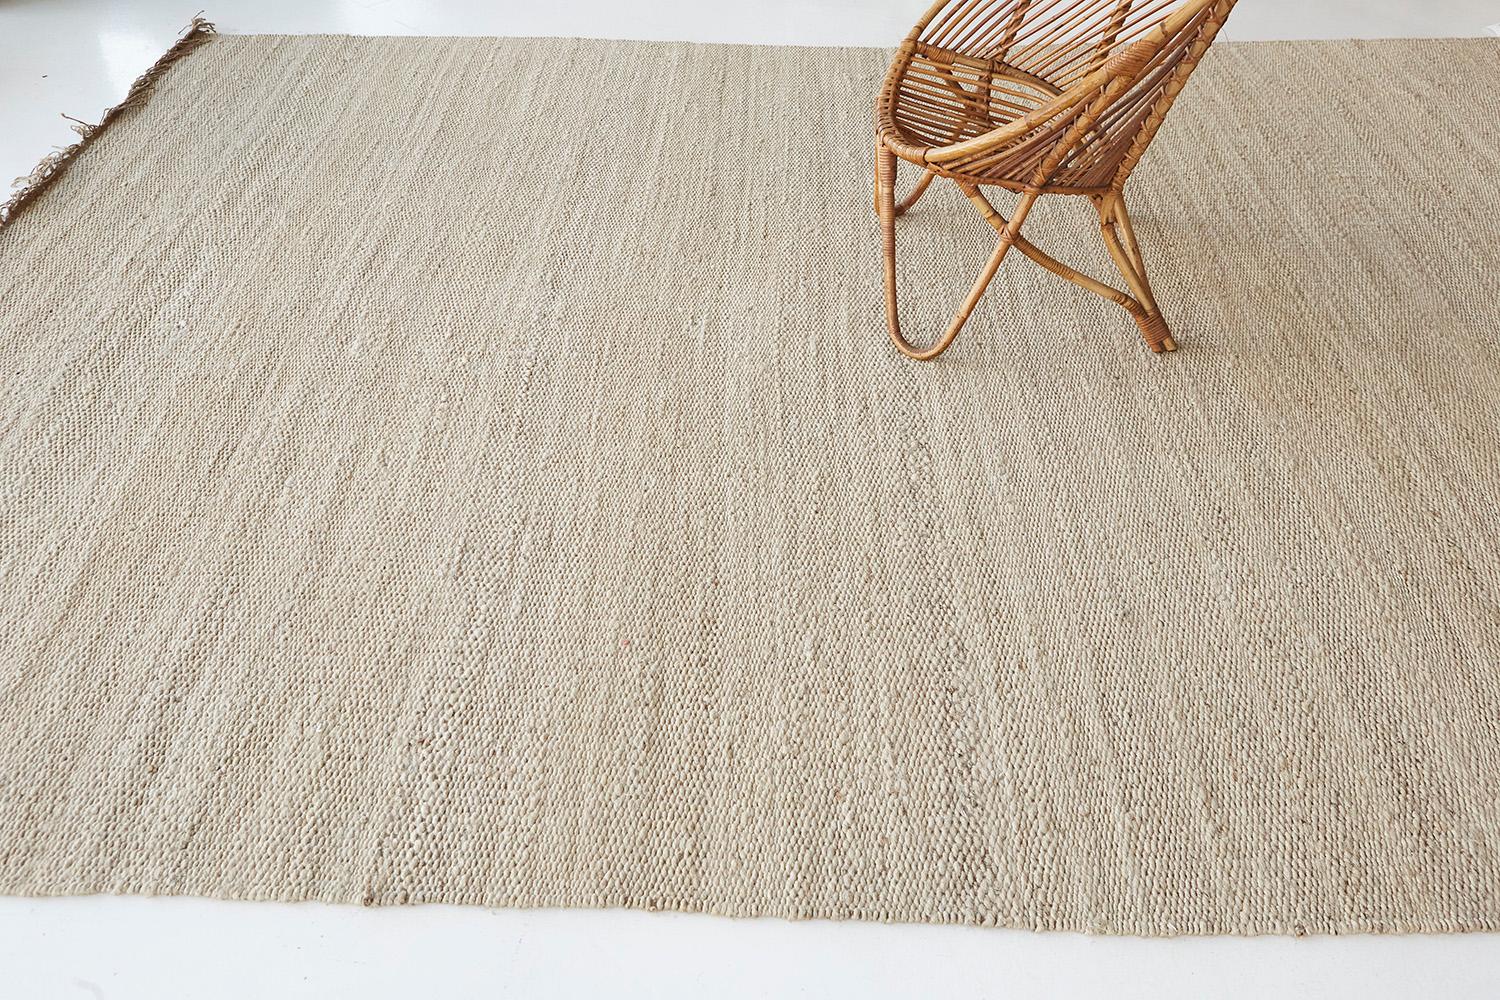 A solid design flatweave features a horizontal stroke of the neutral tone of hemp. Embedded with beautiful tassels that match the simplicity yet a sophisticated kind of masterpiece. This decor will add harmonies to your modern interior and lift the